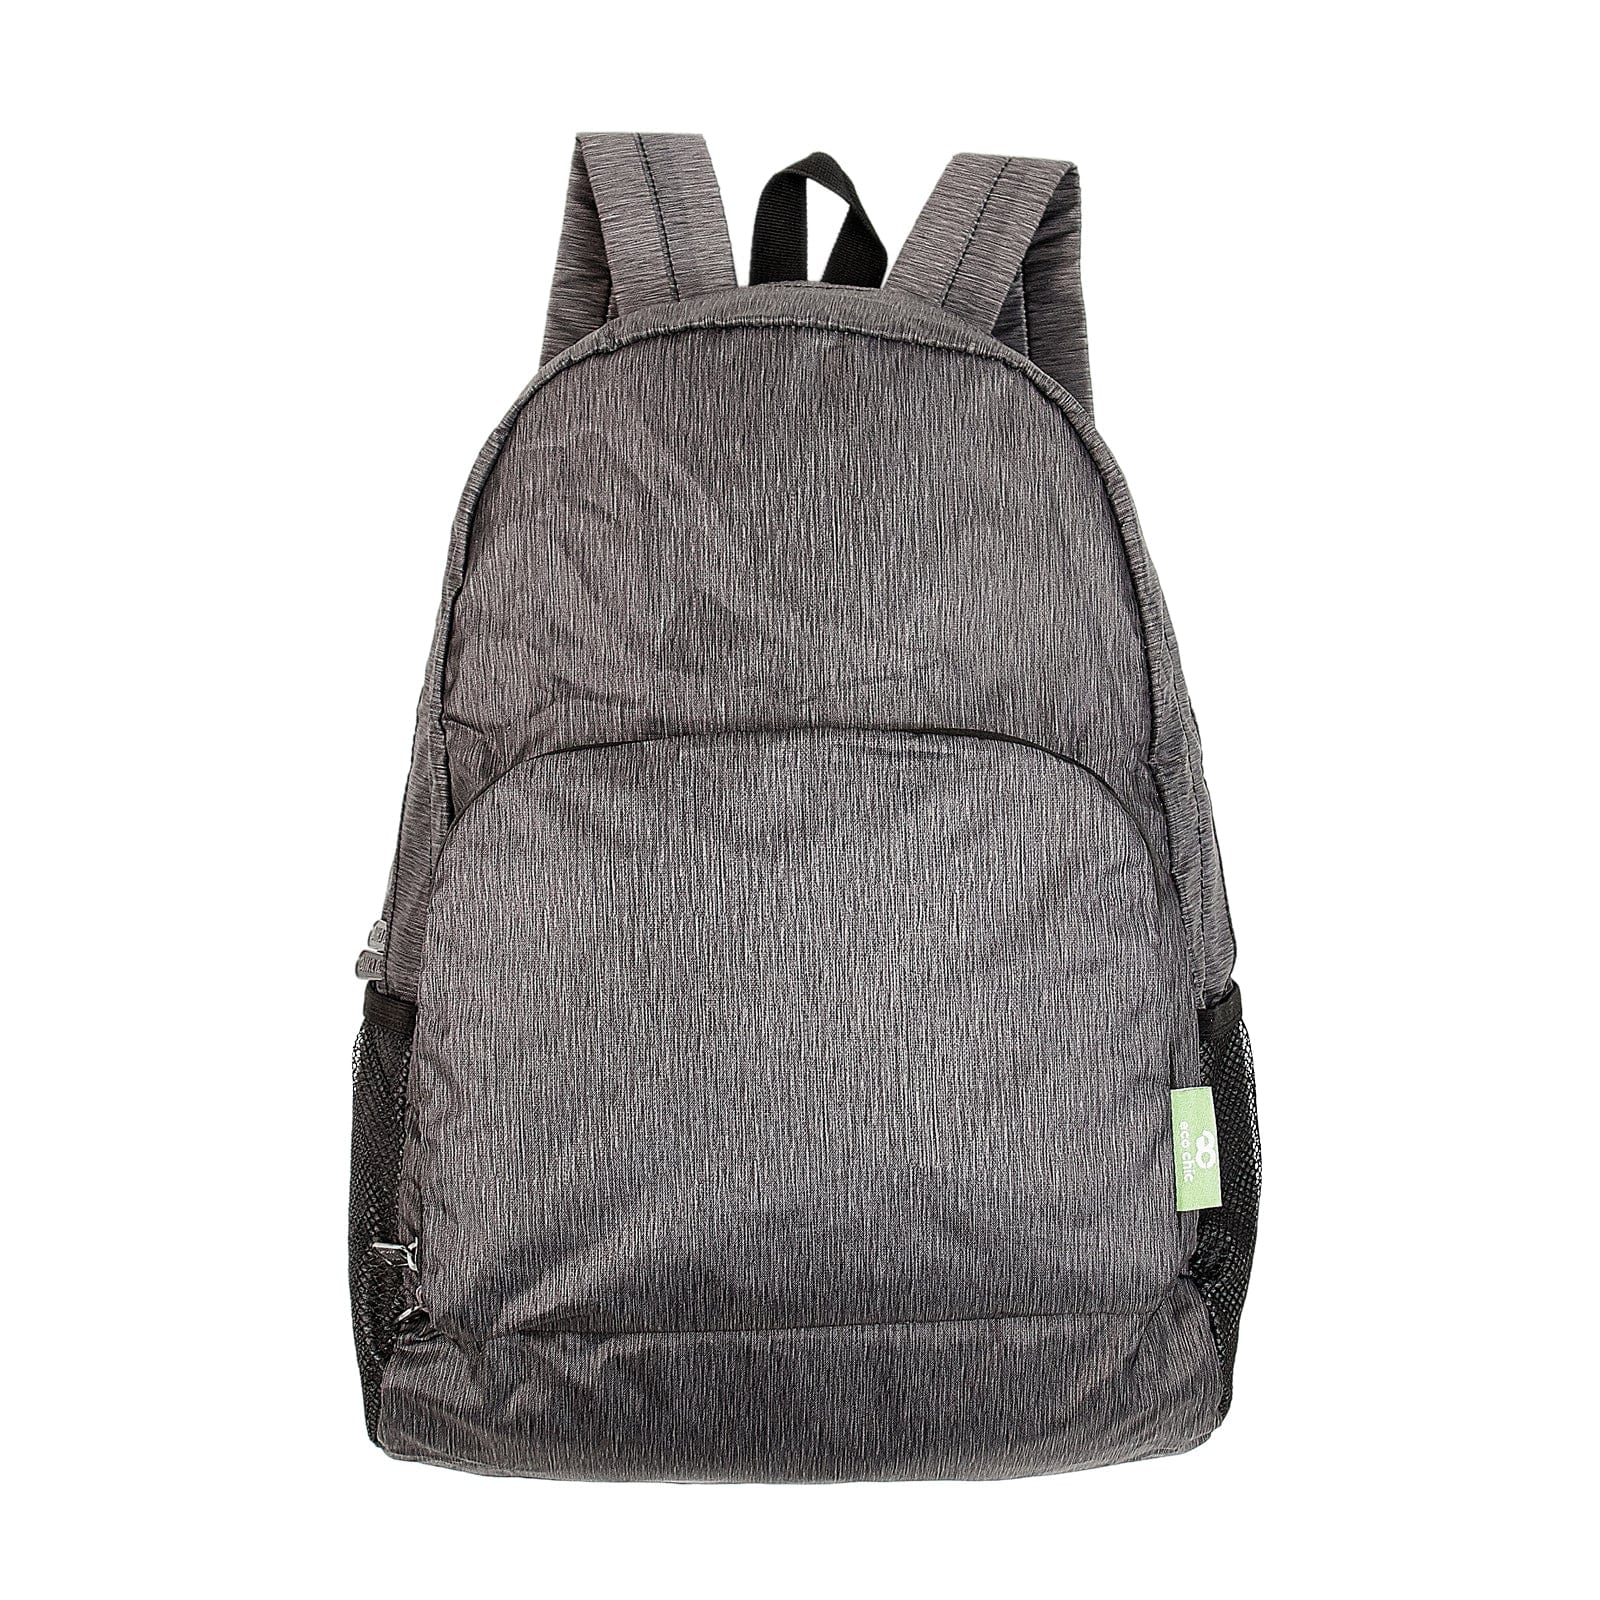 Eco Chic Eco Chic Lightweight Foldable Backpack Grey